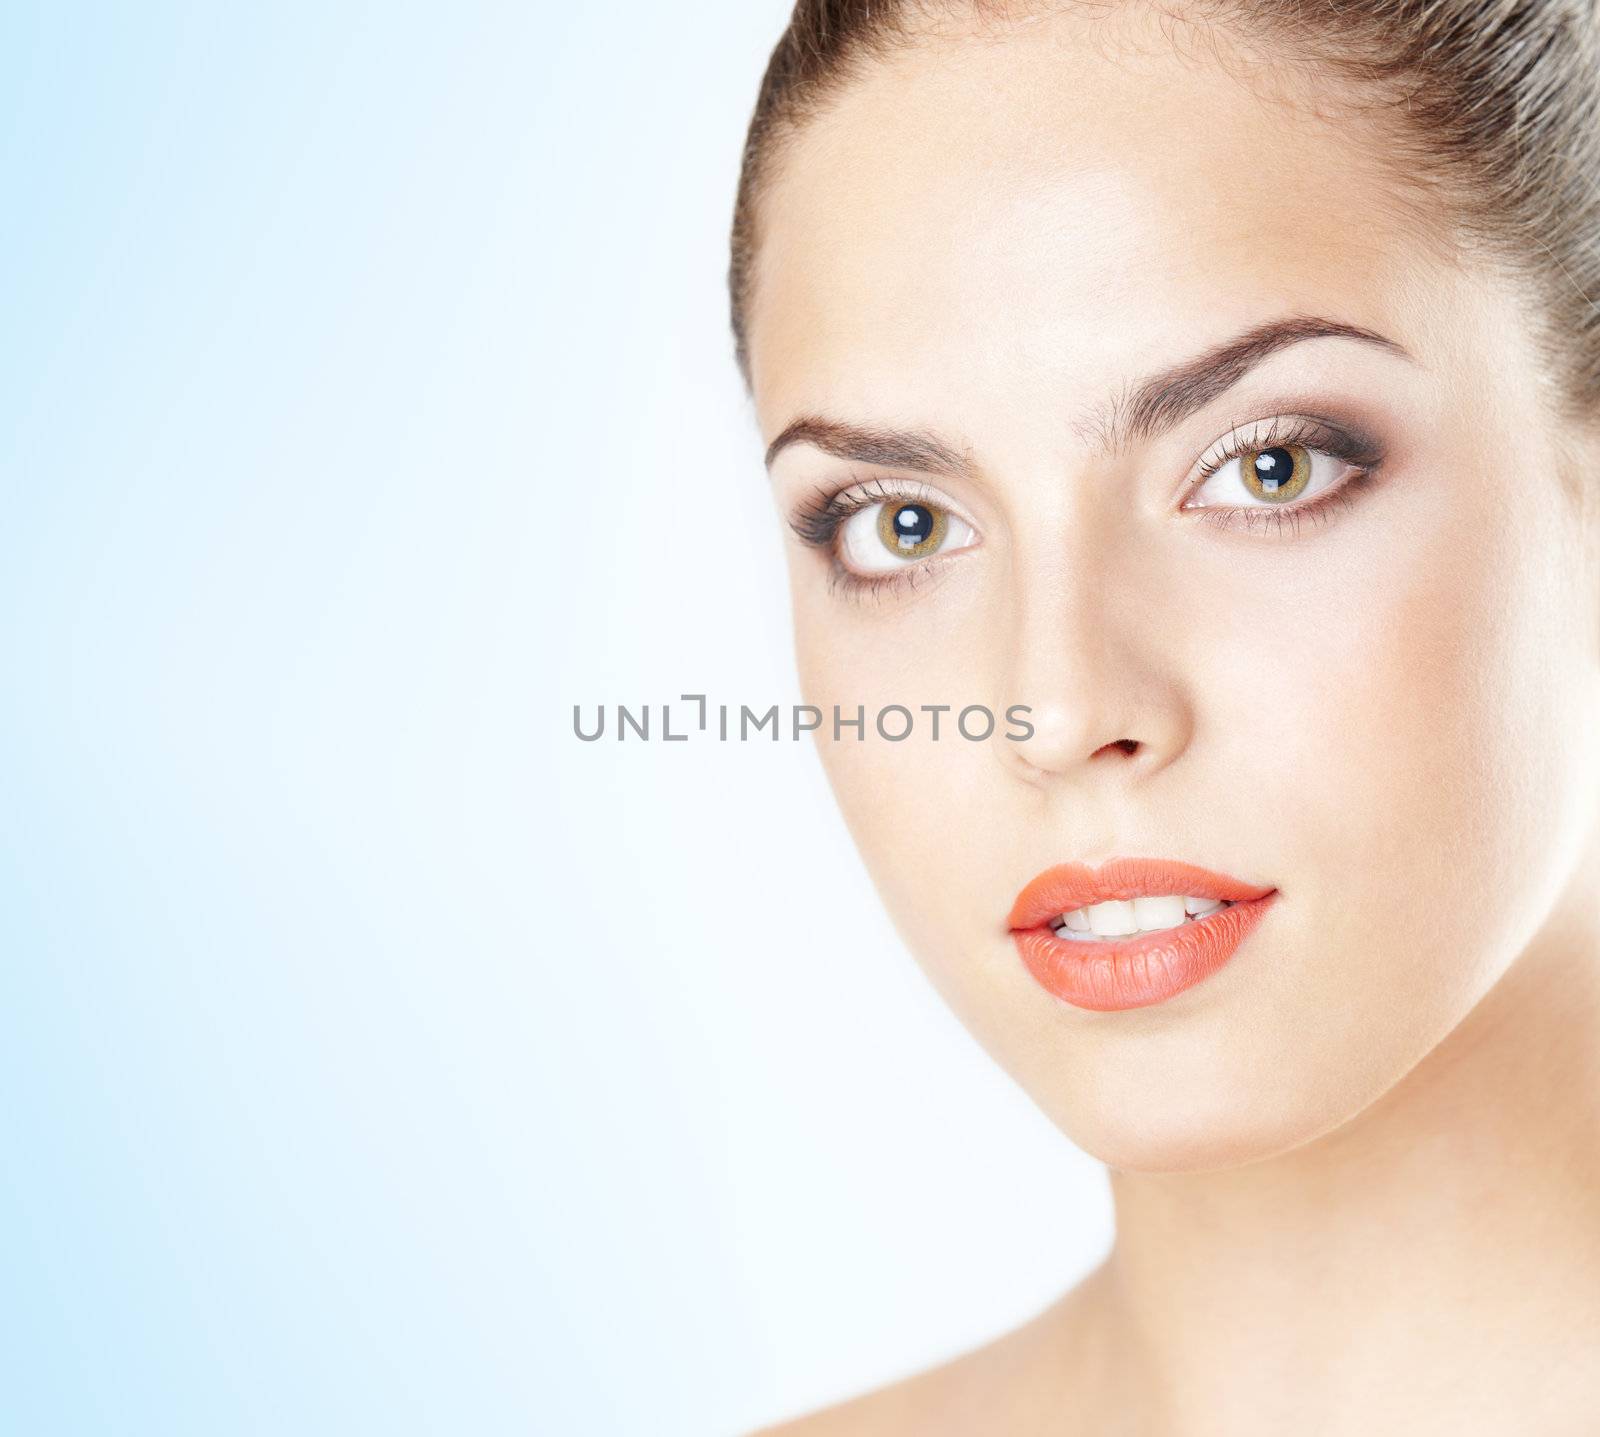 Close-up portrait of the beautiful woman with perfect makeup on a blue background